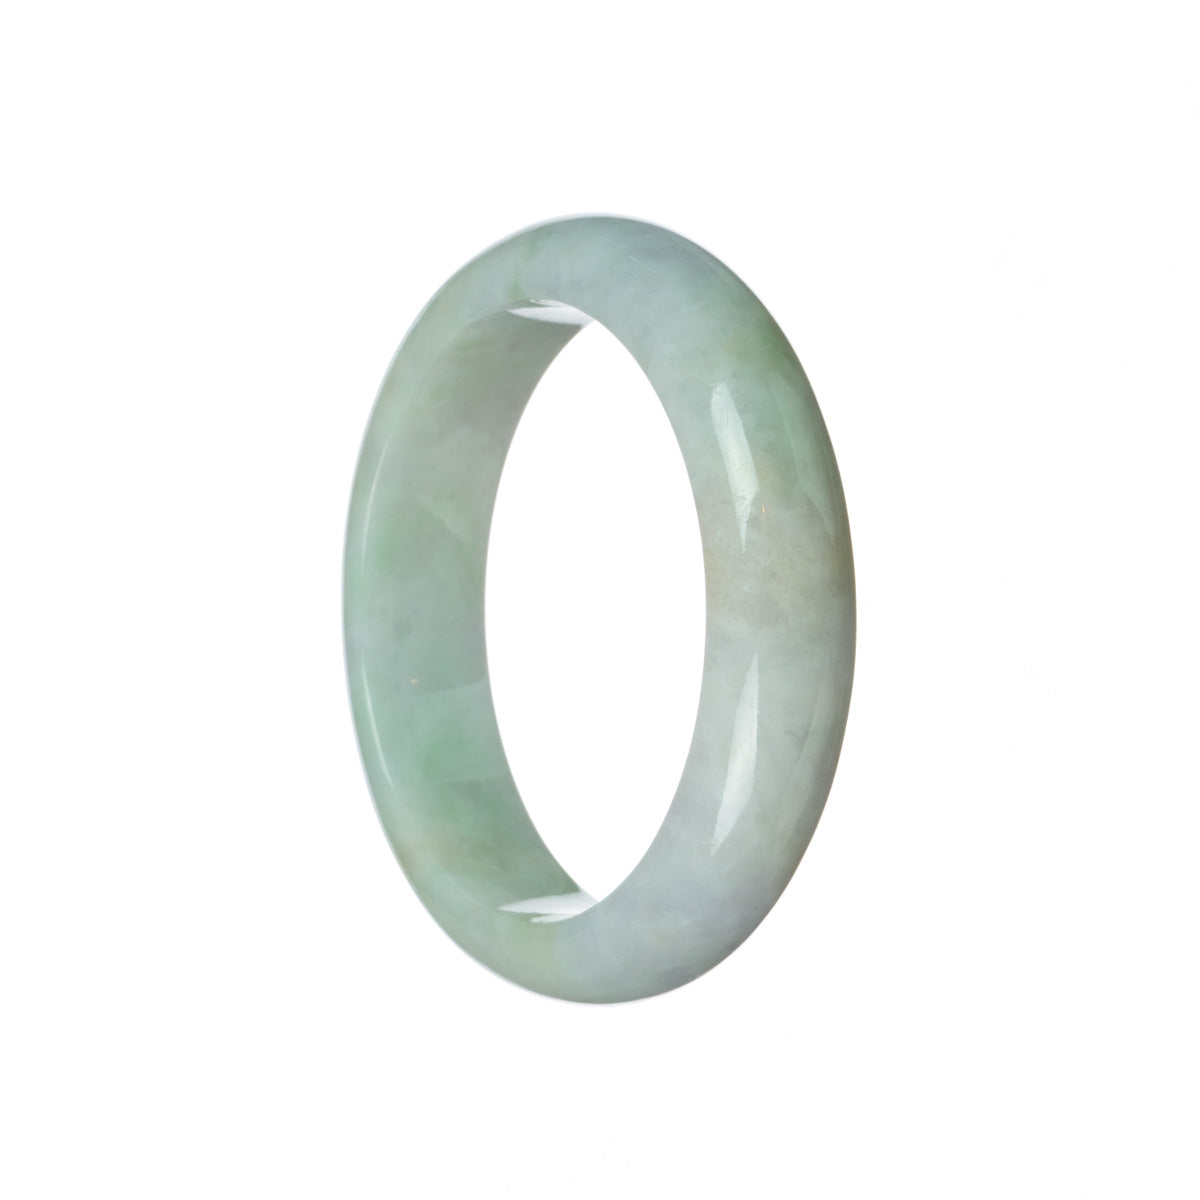 Authentic Untreated Lavender with green Jadeite Bangle - 58mm Half Moon